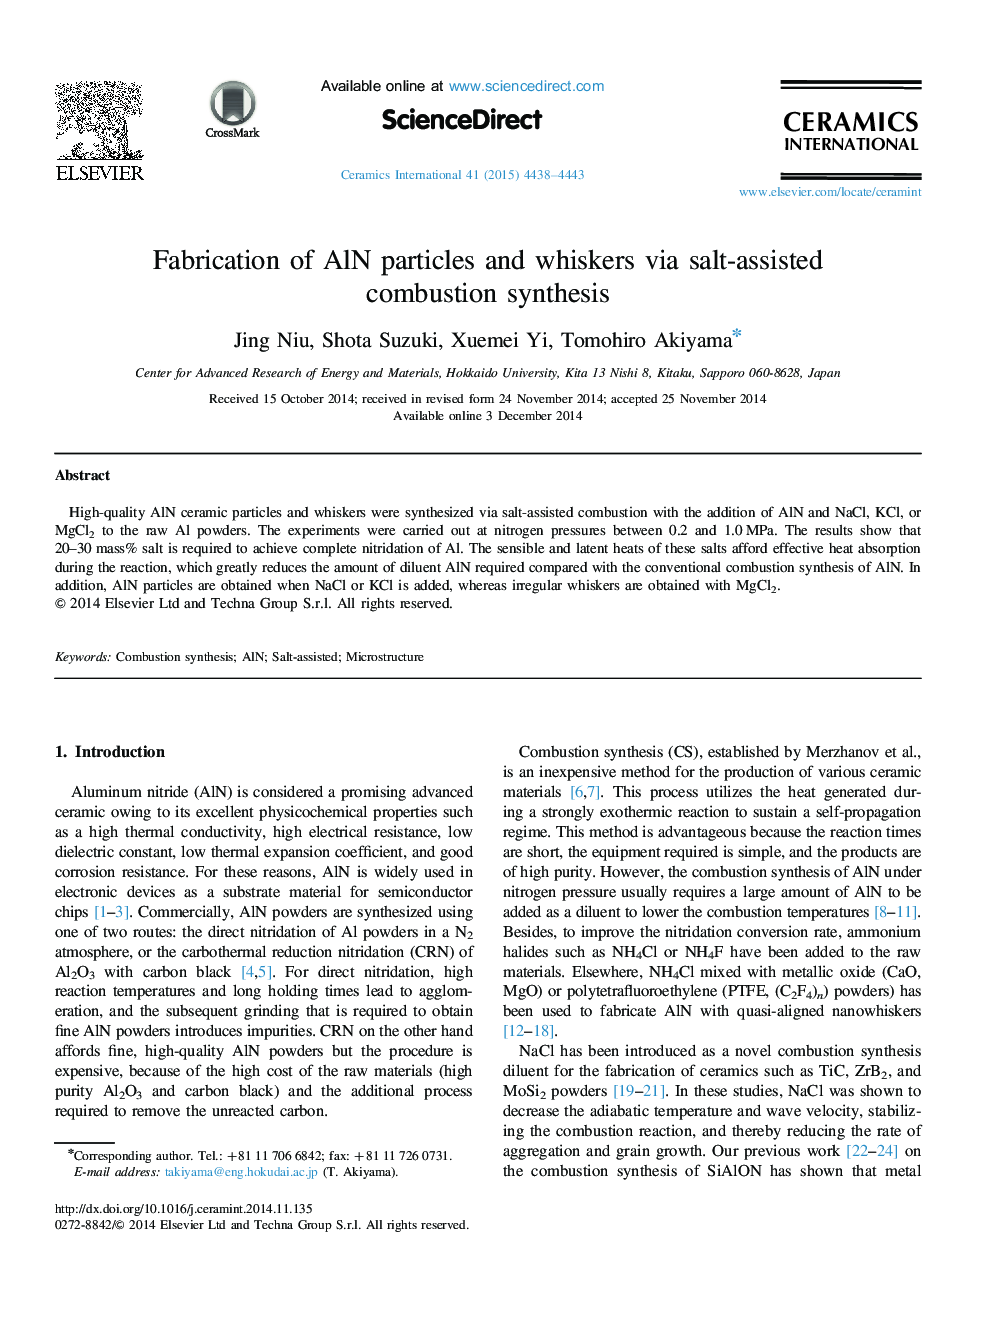 Fabrication of AlN particles and whiskers via salt-assisted combustion synthesis